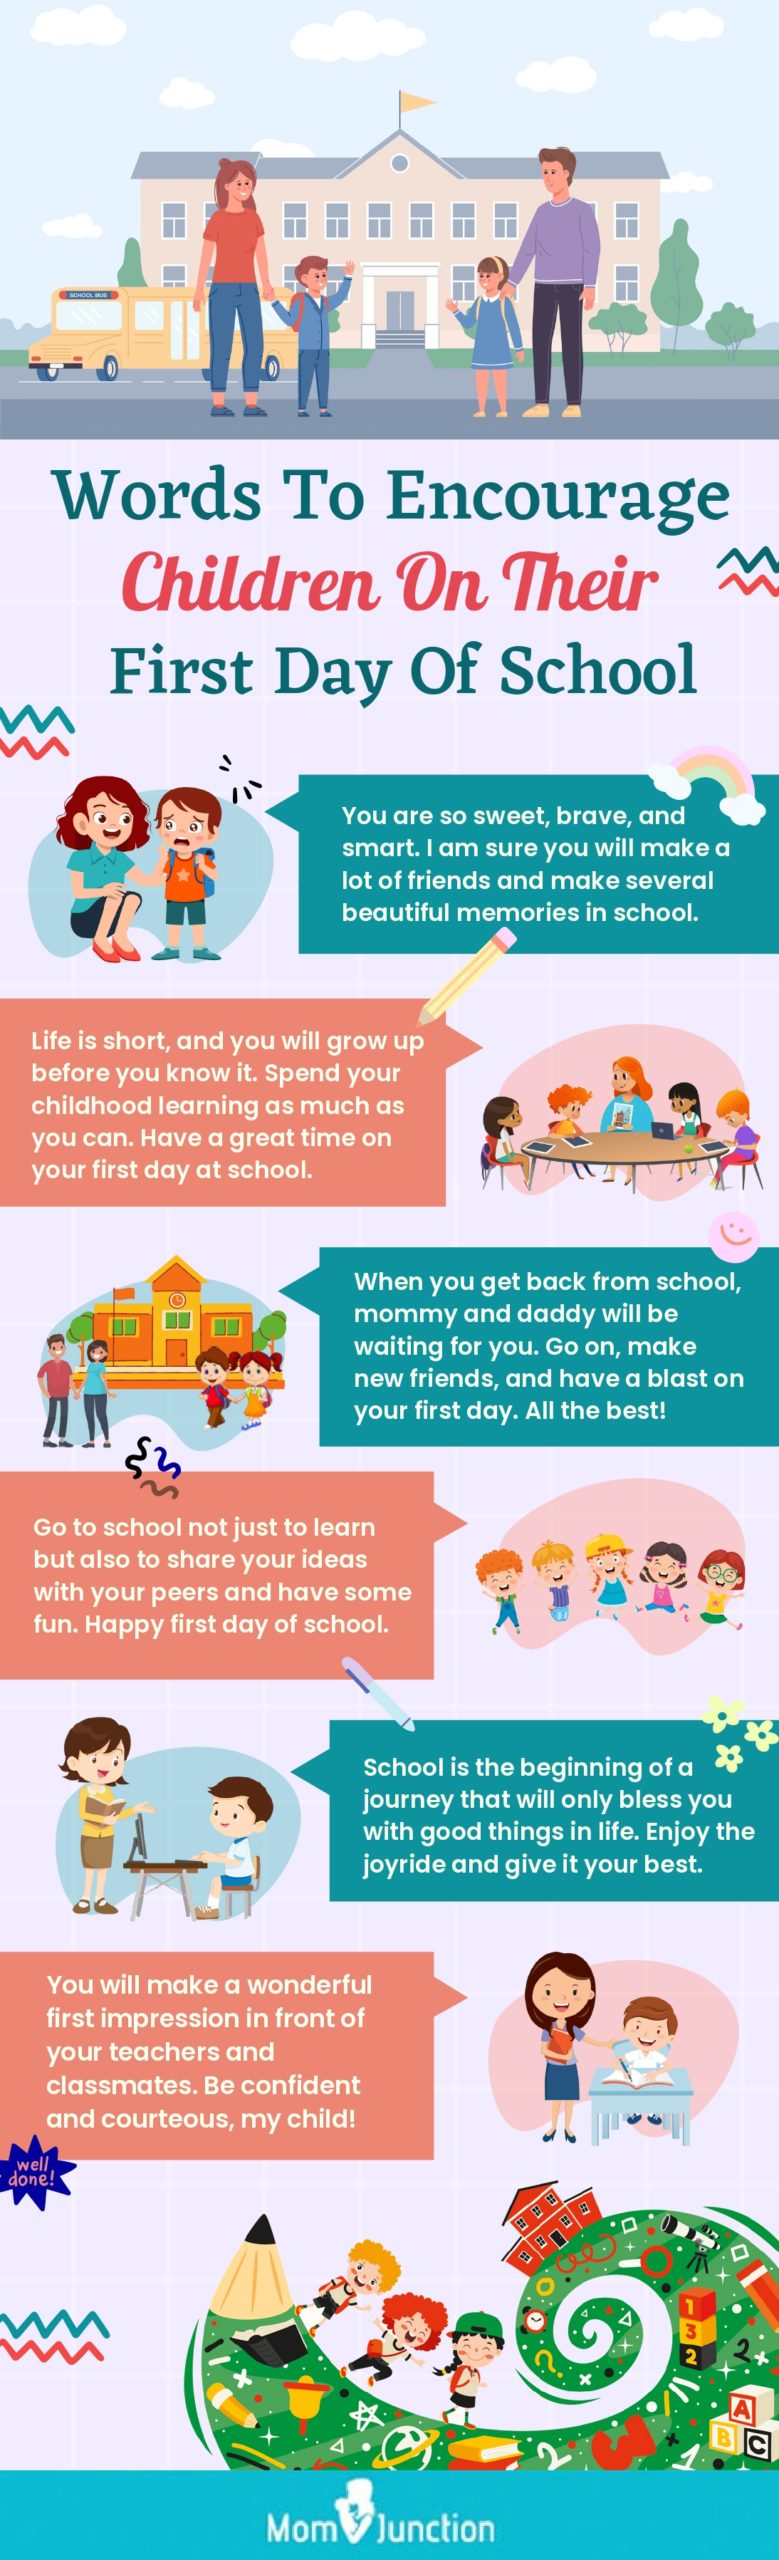 101 Inspiring Educational Quotes For Kids